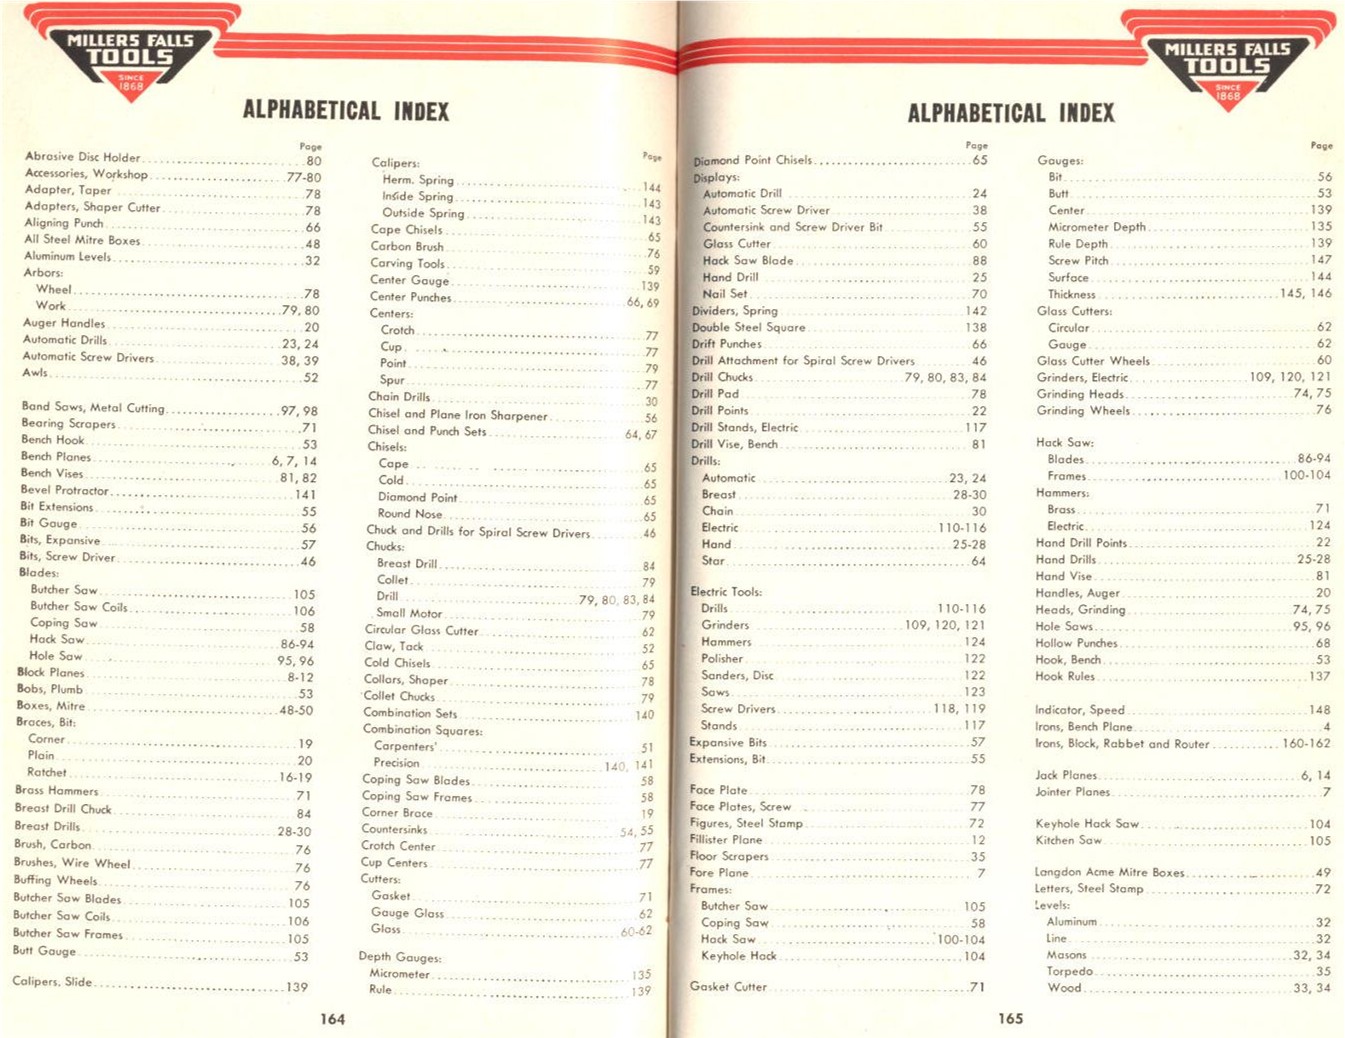 Millers Falls Index for # 49 Catalog